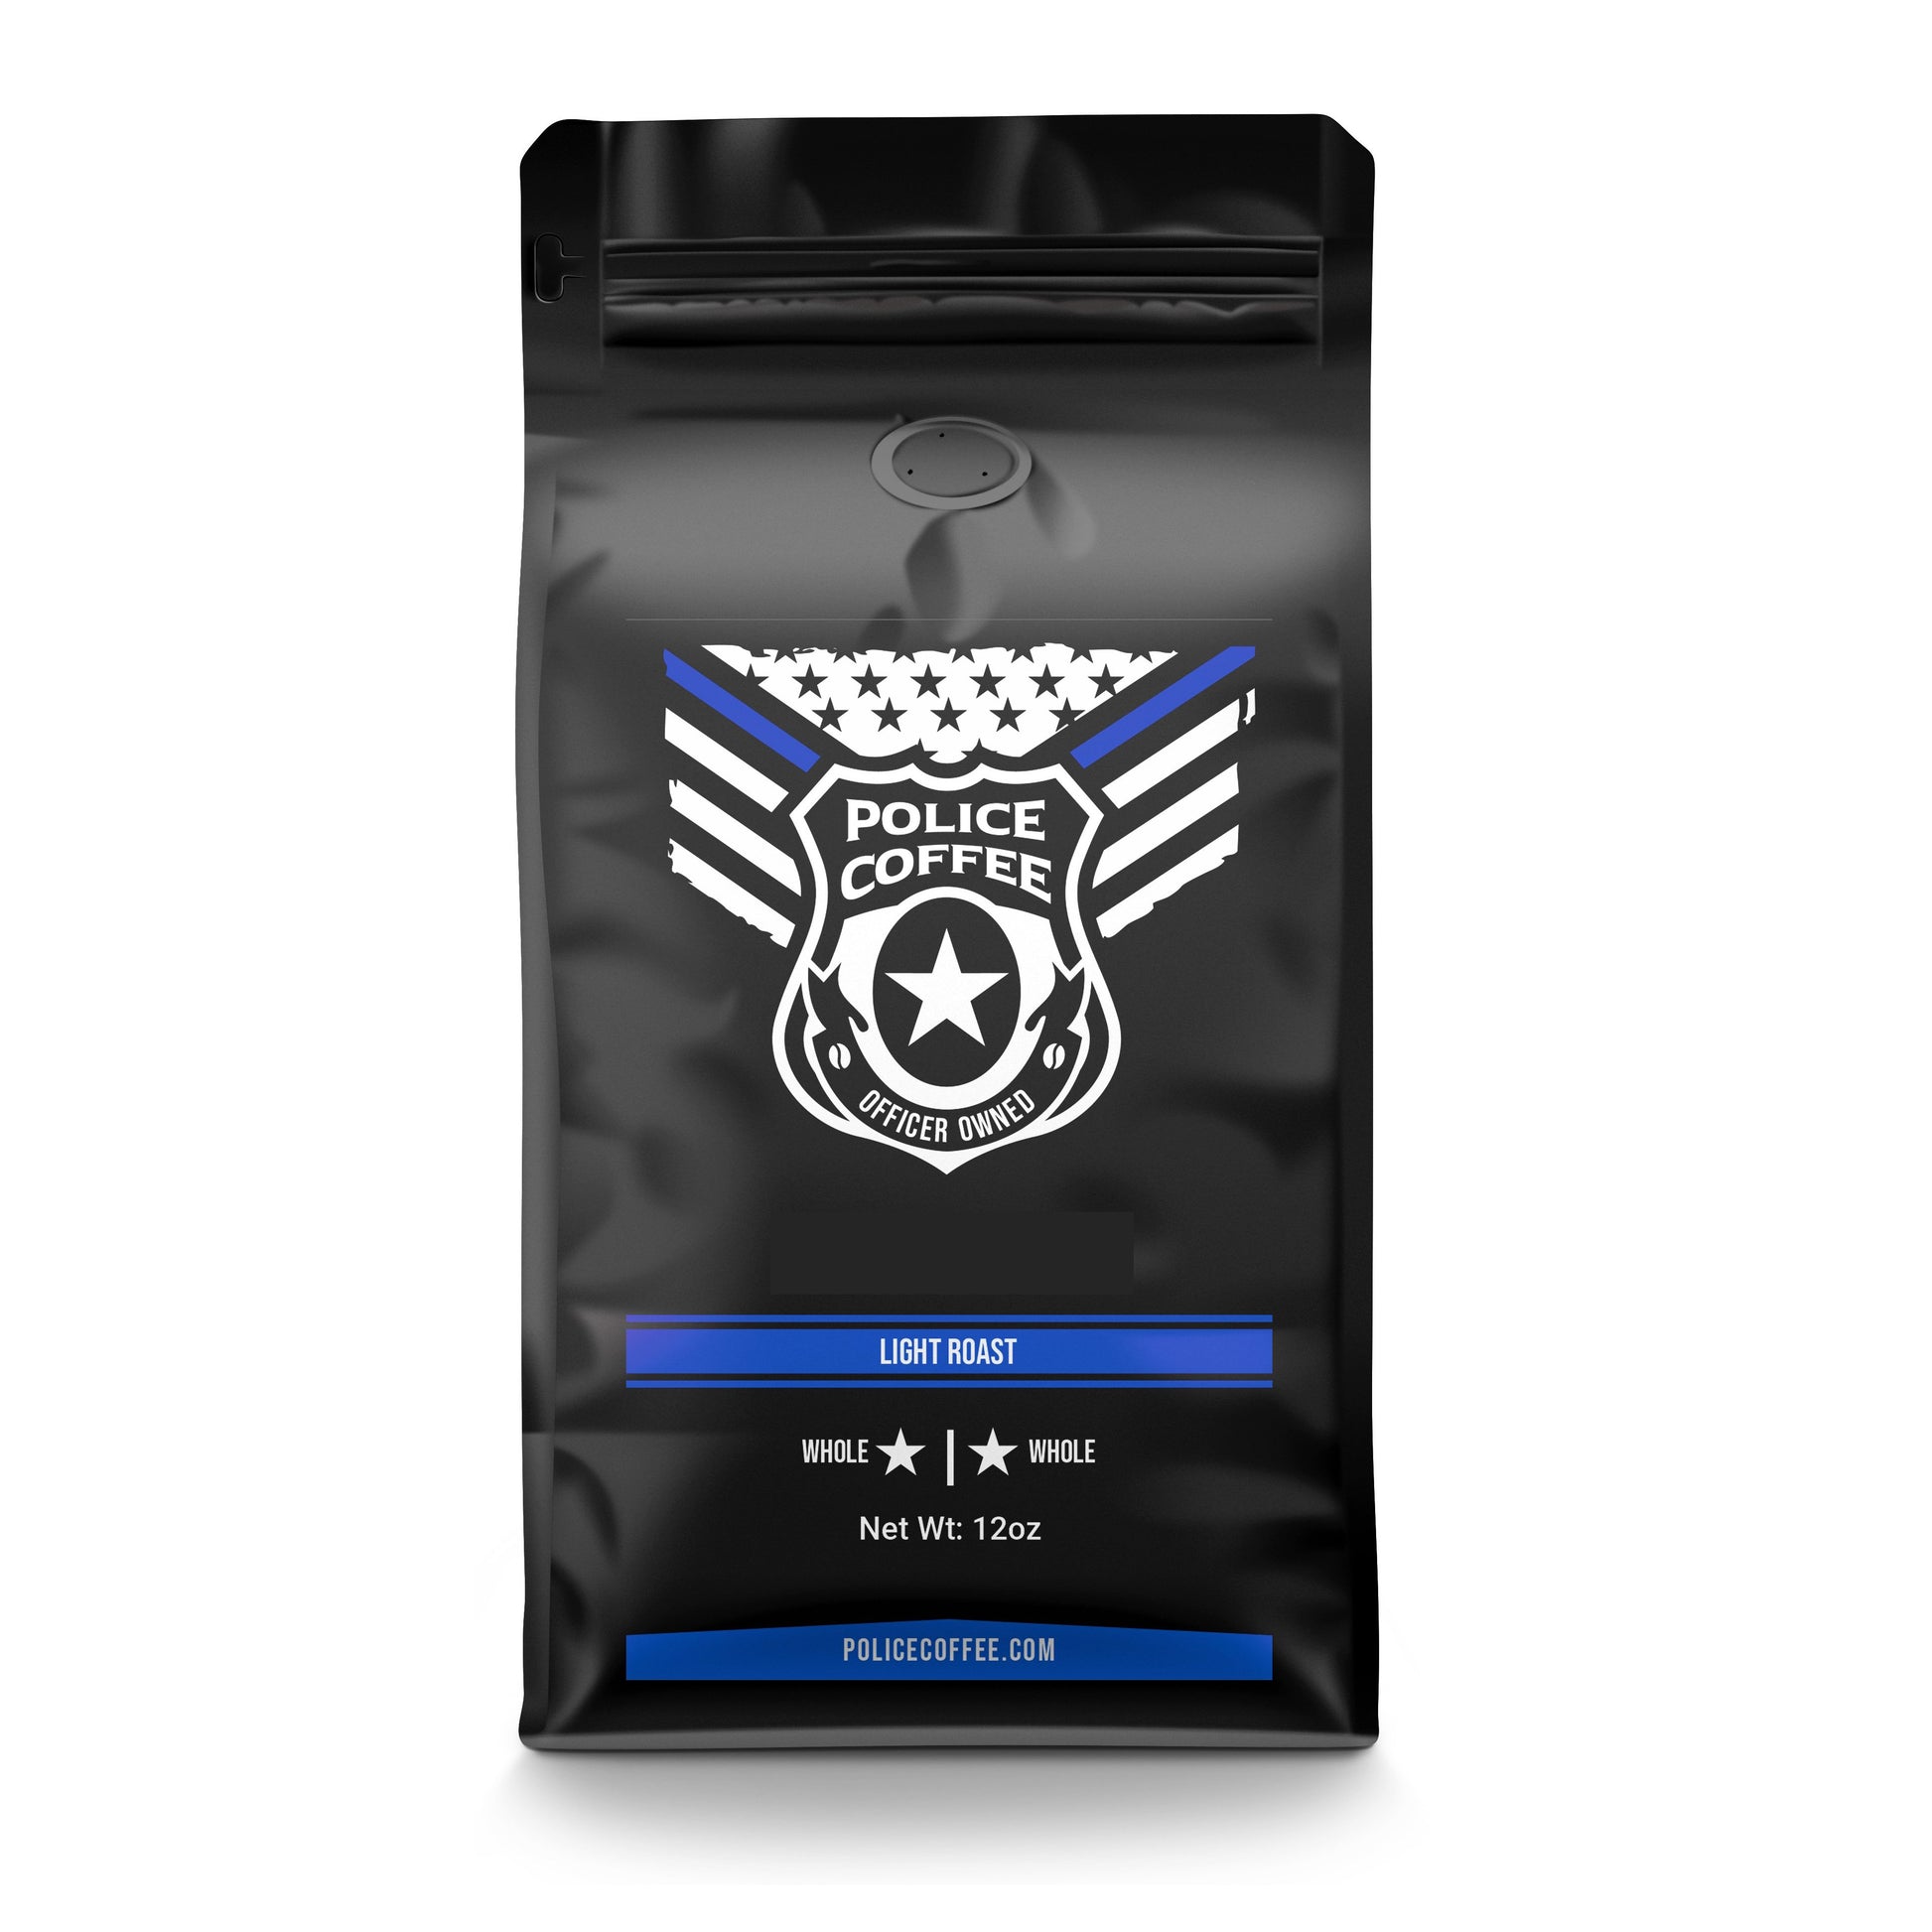 Coffee of the Month Club - Police Coffee Company